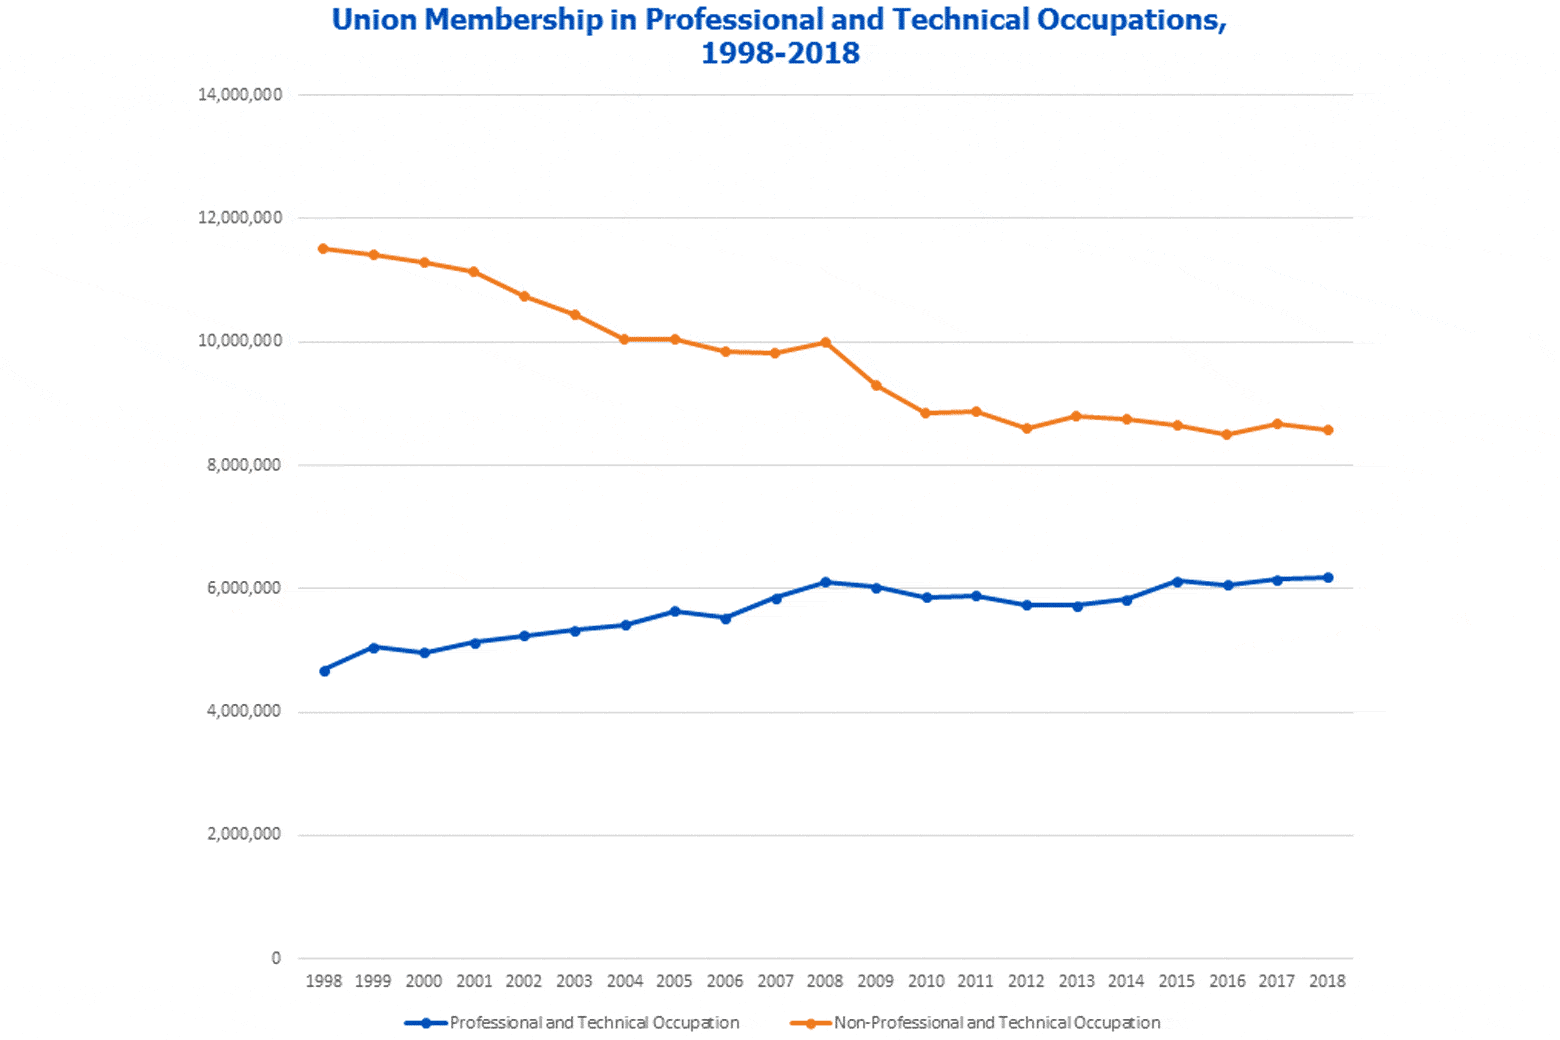 A chart of union membership in professional and technical occupations over the years